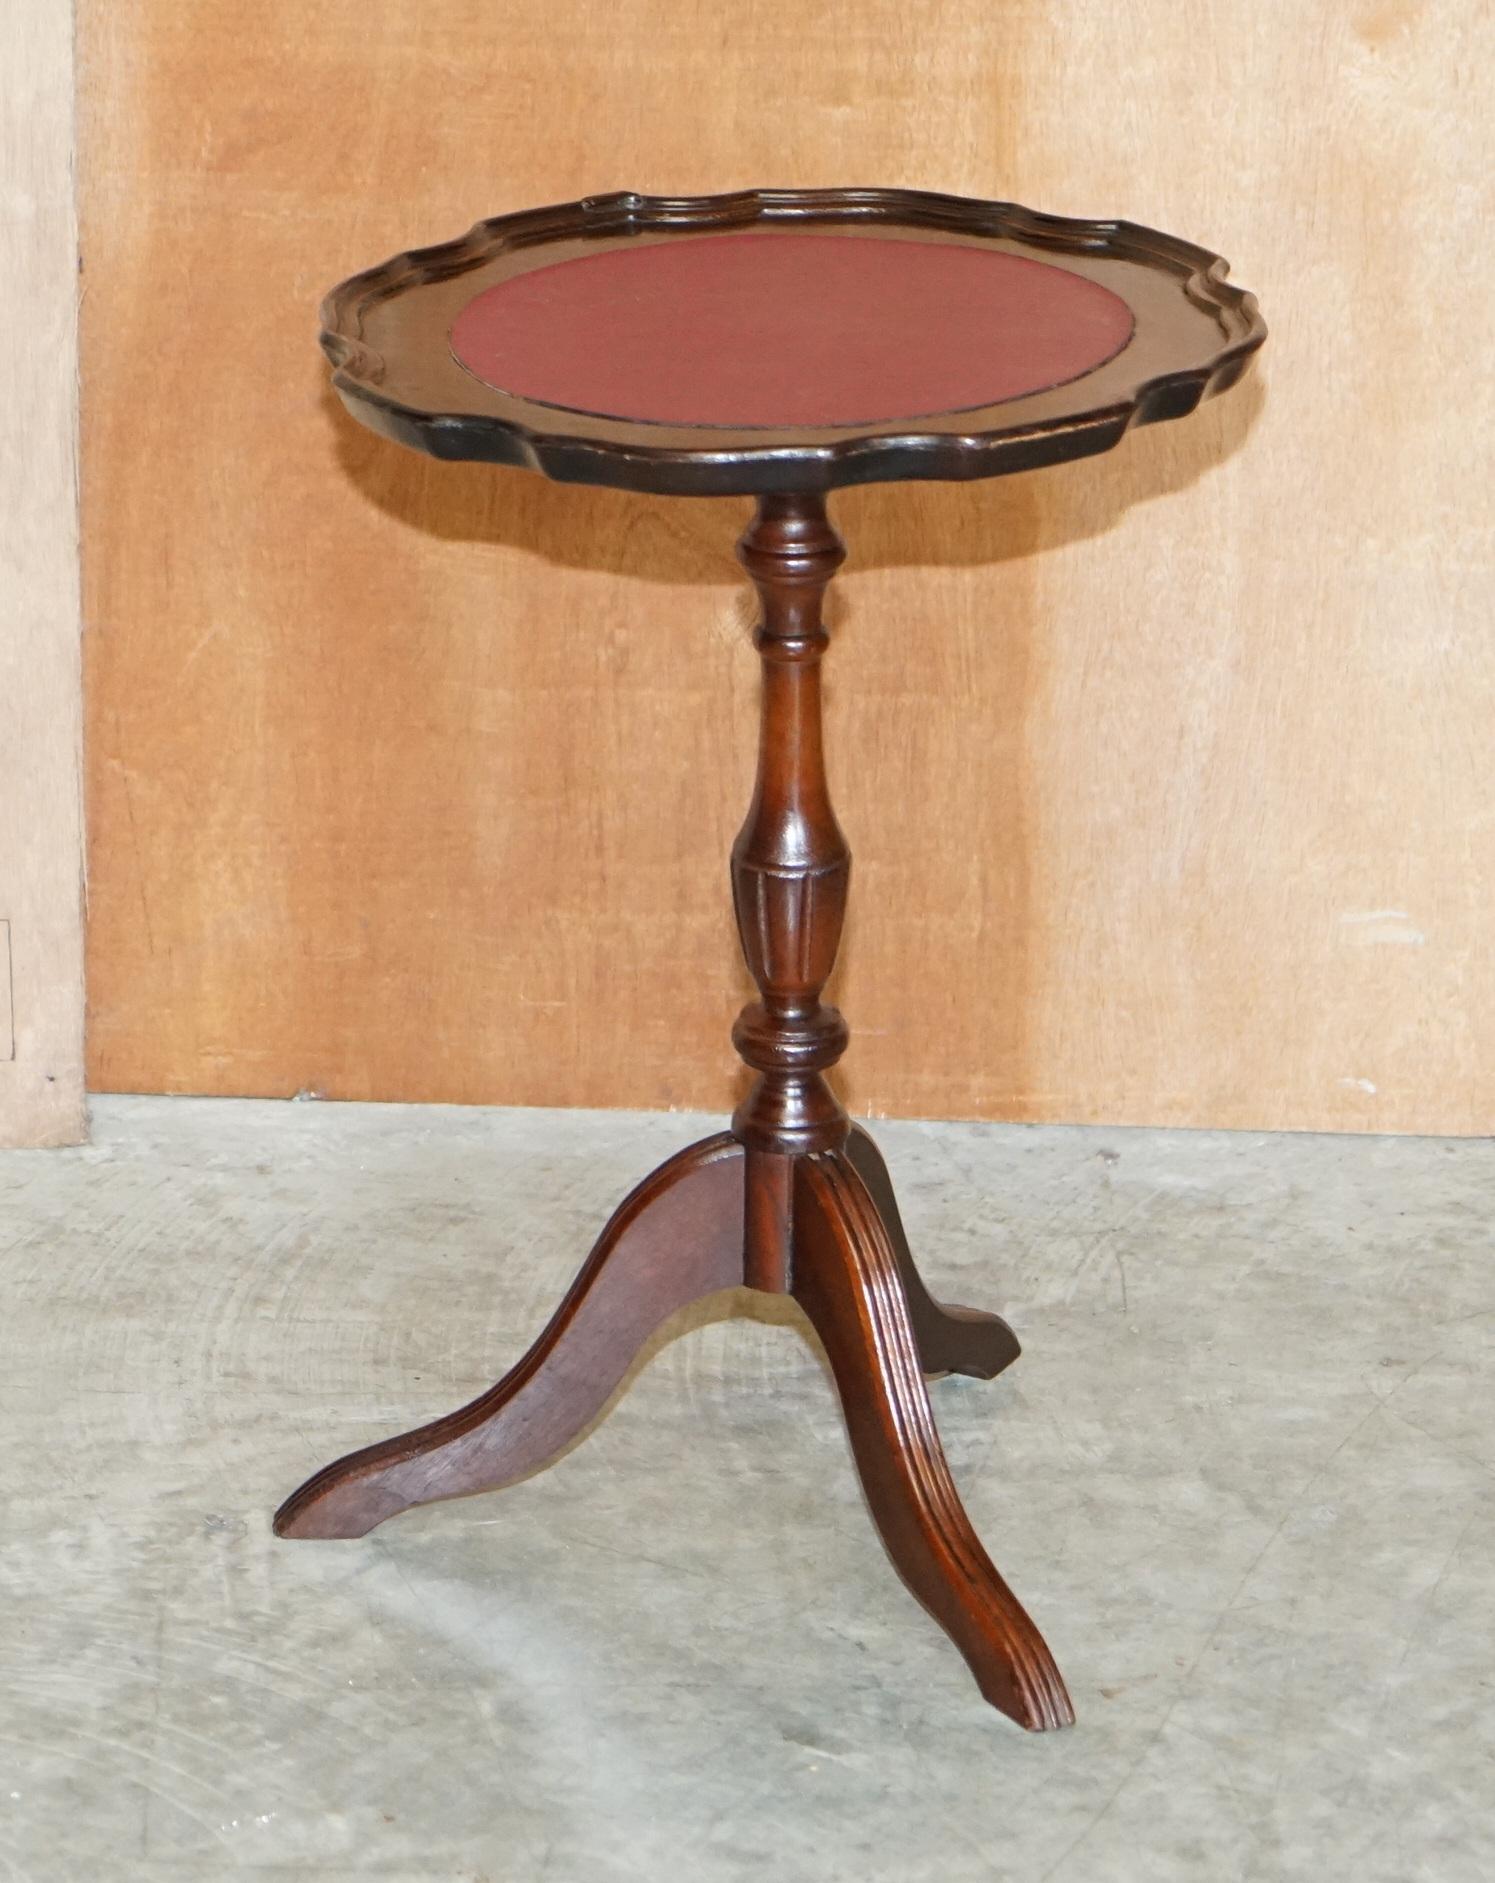 We are delighted to offer this very nice vintage Bevan Funnell mahogany & oxblood leather tripod table

A good looking and well made piece, ideally suited for a lamp or glass of wine with a picture frame

The piece has been cleaned waxed and